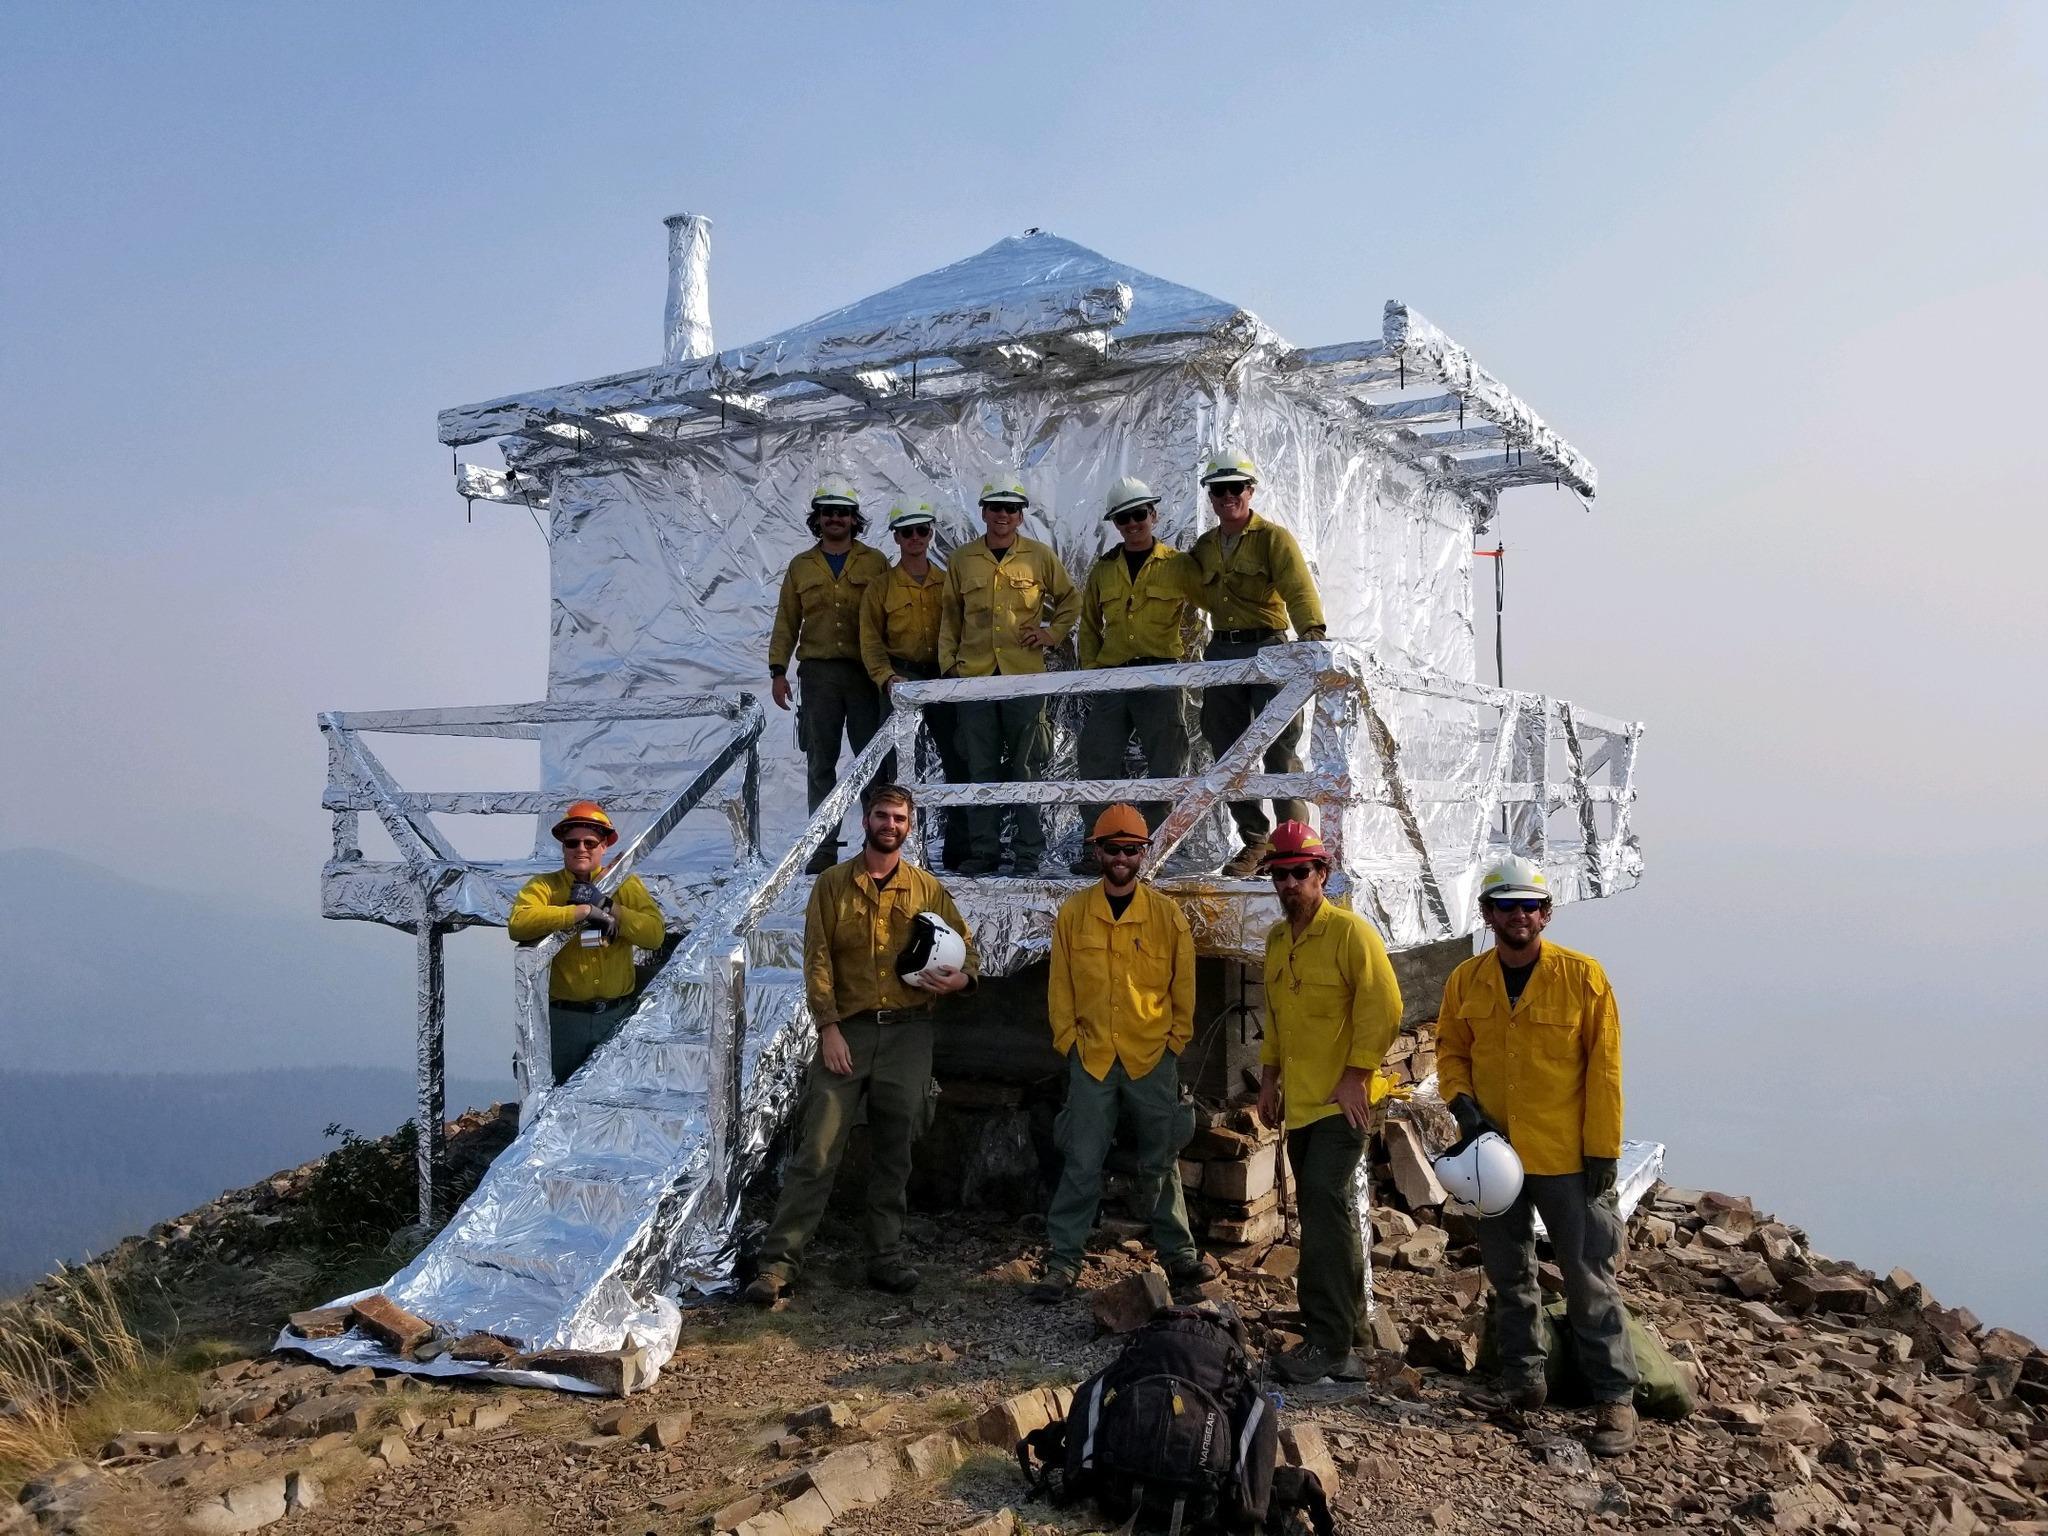 Local Cabinet Ranger District employees and Grangeville Helitack crew members flew to the Star Peak Lookout yesterday and successfully wrapped the lookout in heat resistant material.